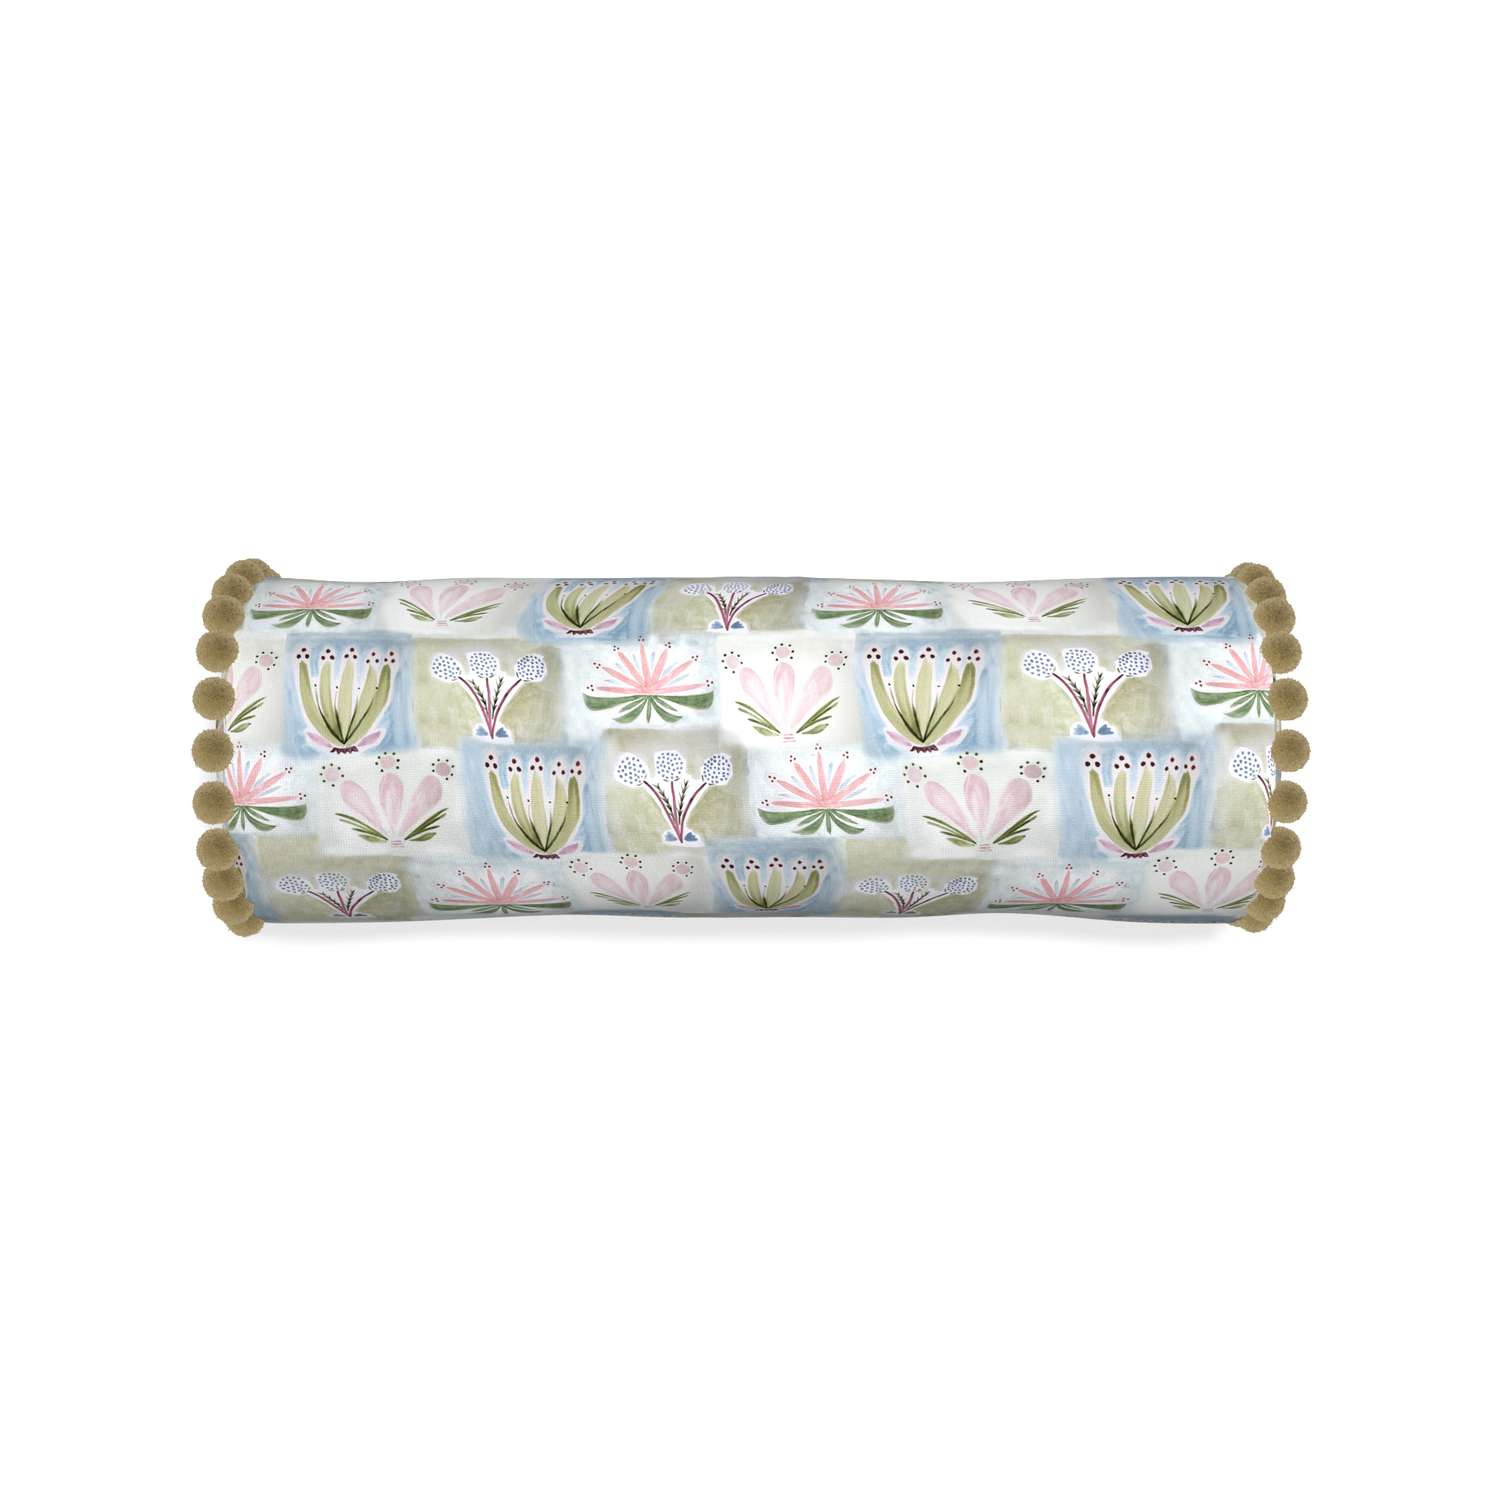 Bolster harper custom hand-painted floralpillow with olive pom pom on white background